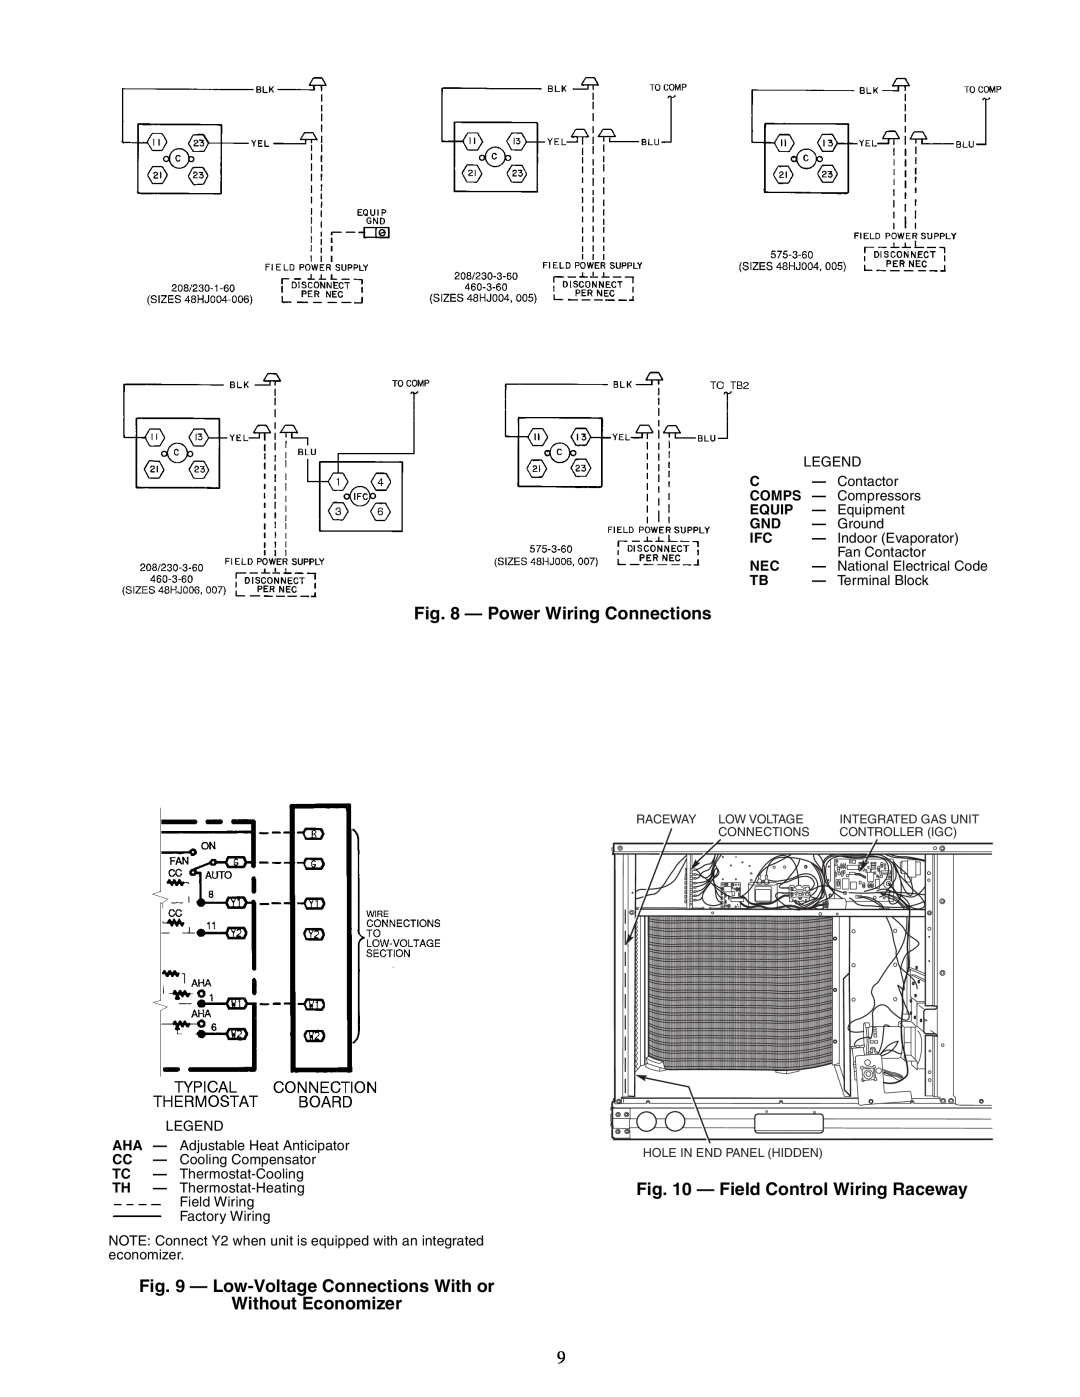 Carrier 48HJD005-007 specifications Power Wiring Connections, Low-Voltage Connections With or Without Economizer 